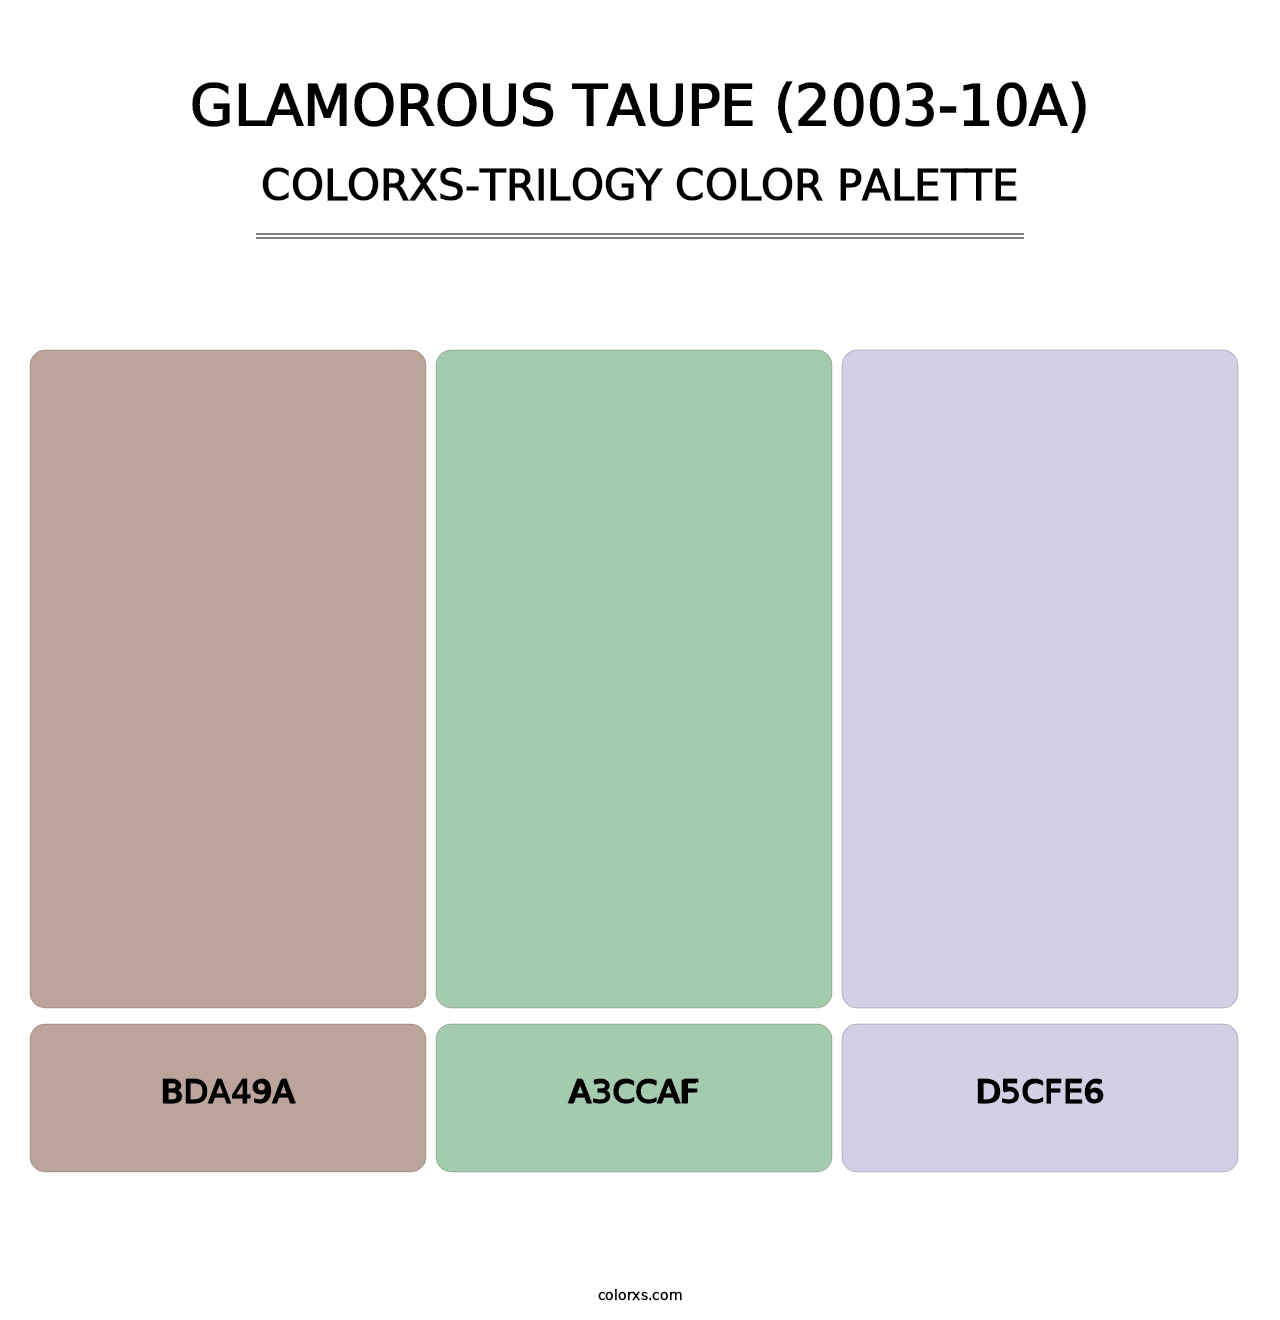 Glamorous Taupe (2003-10A) - Colorxs Trilogy Palette